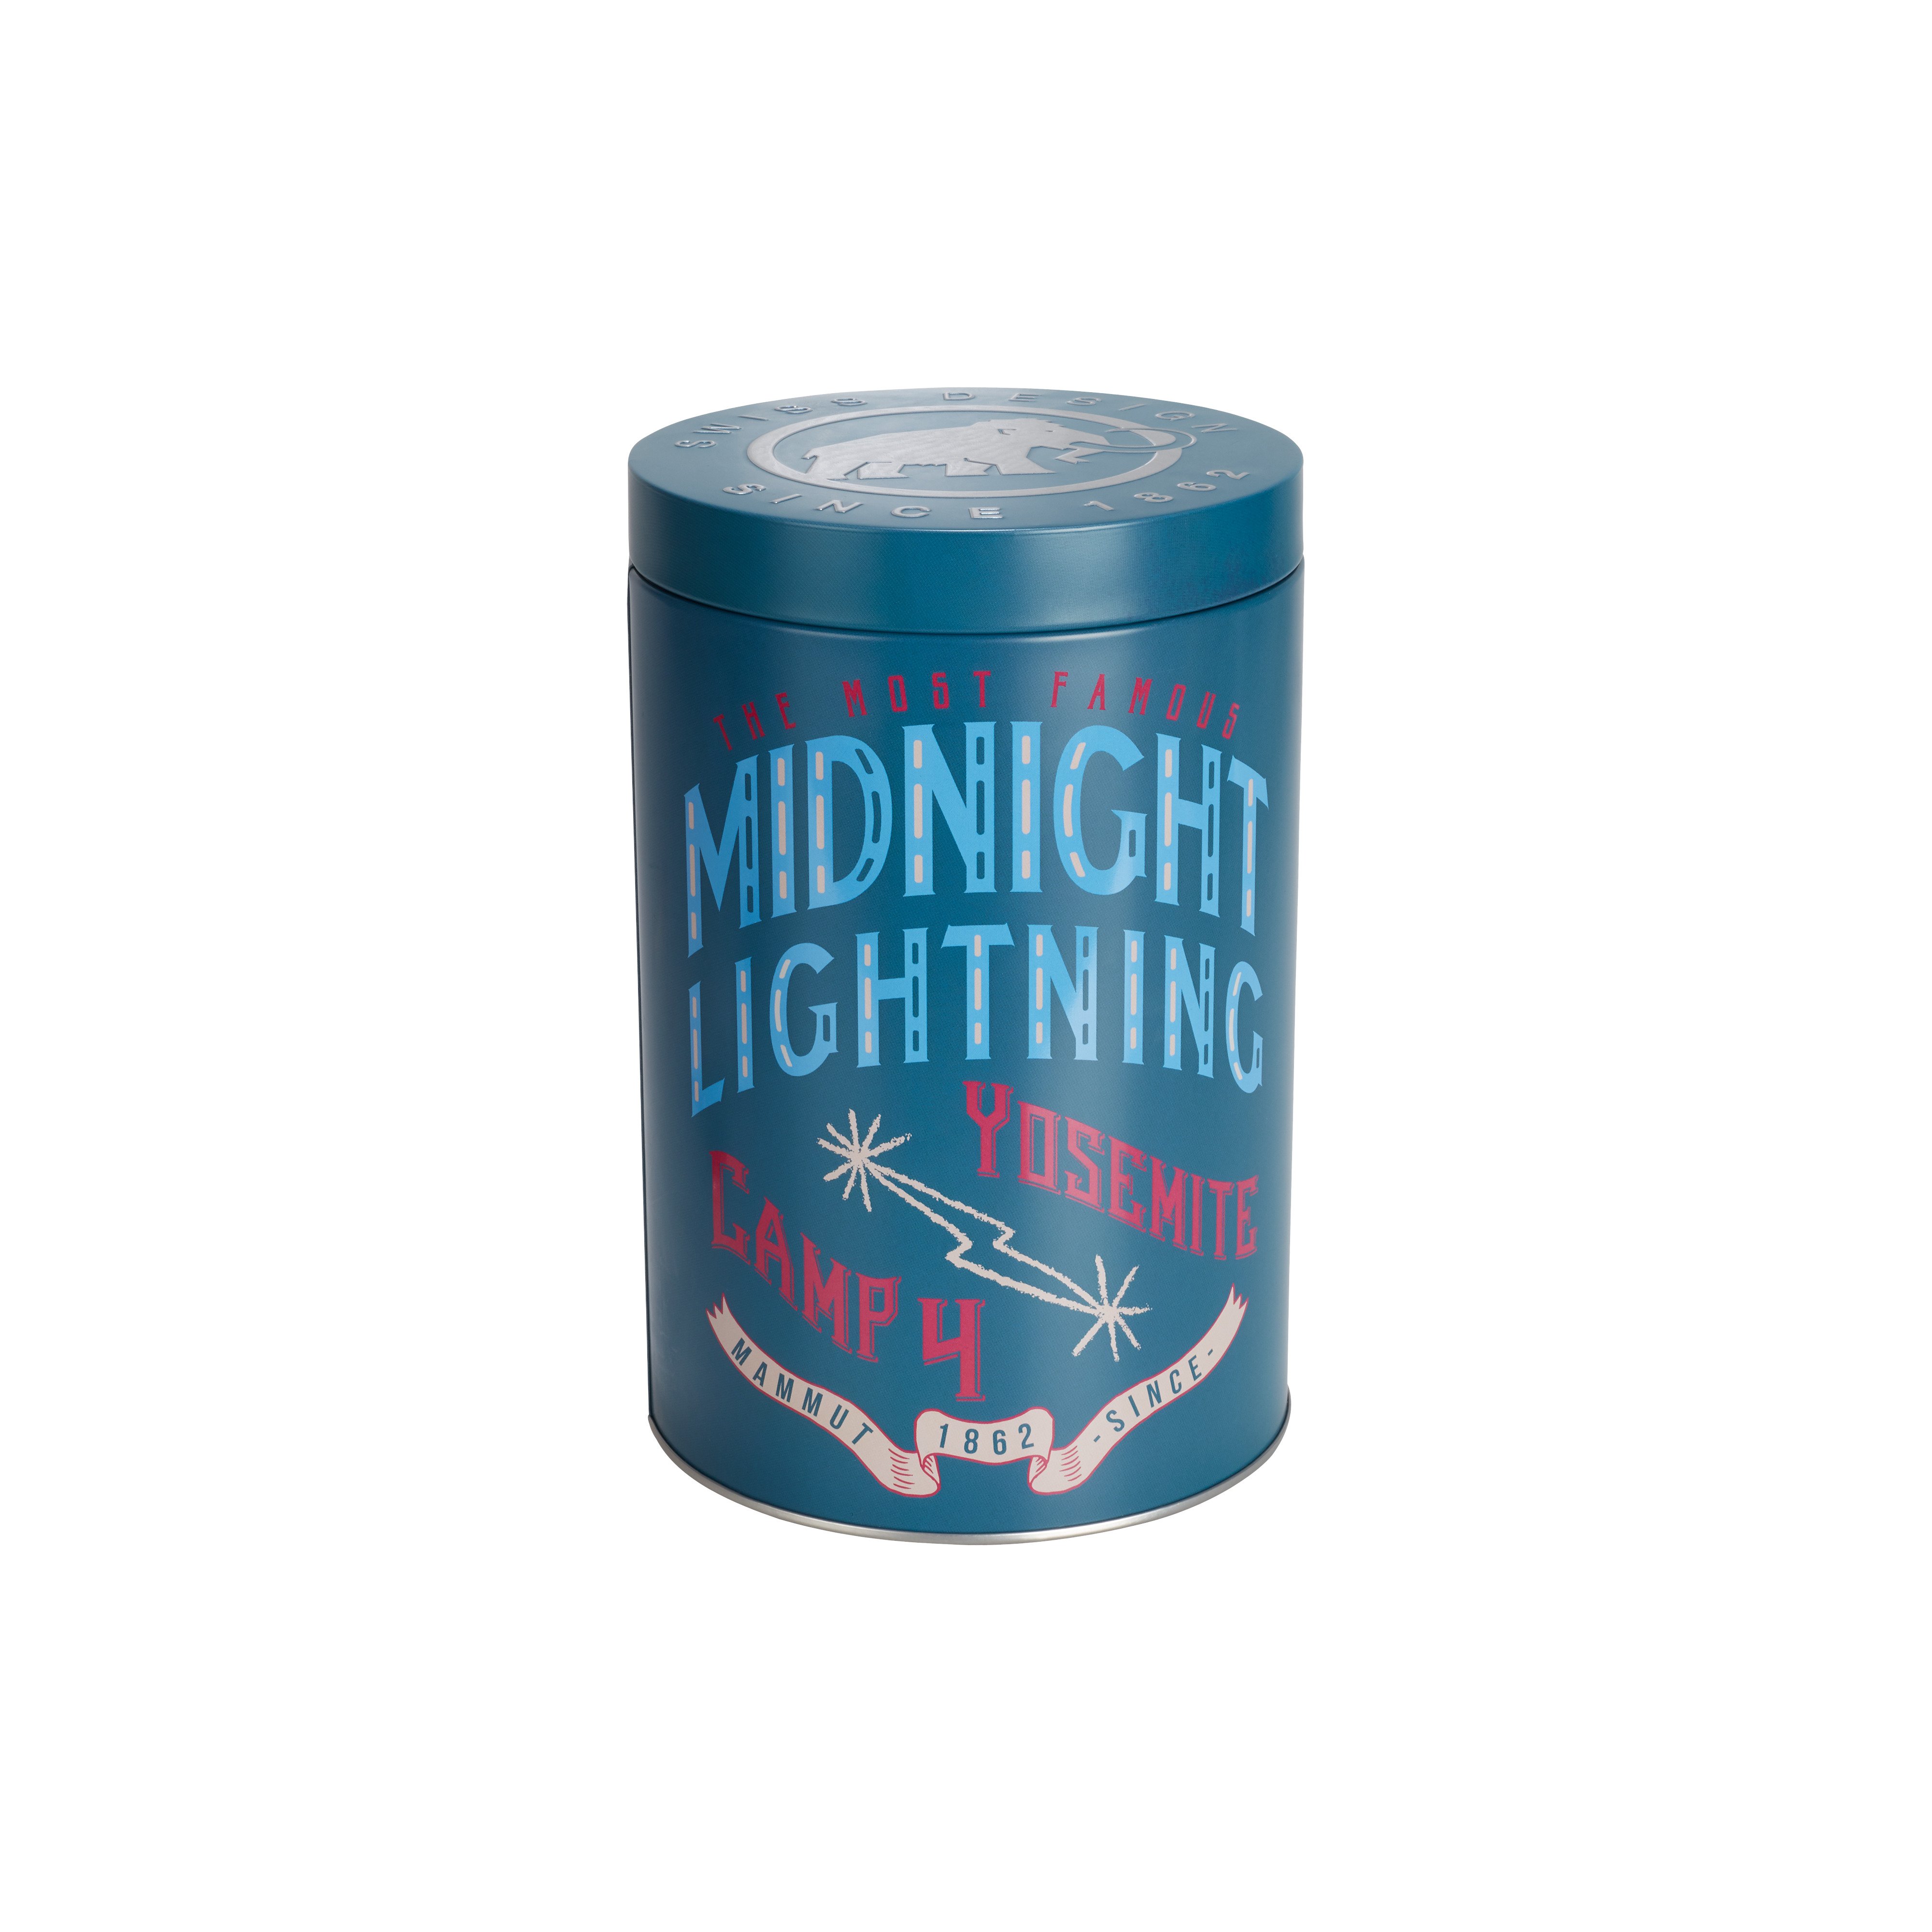 Pure Chalk Collectors Box - midnight lightning, one size thumbnail